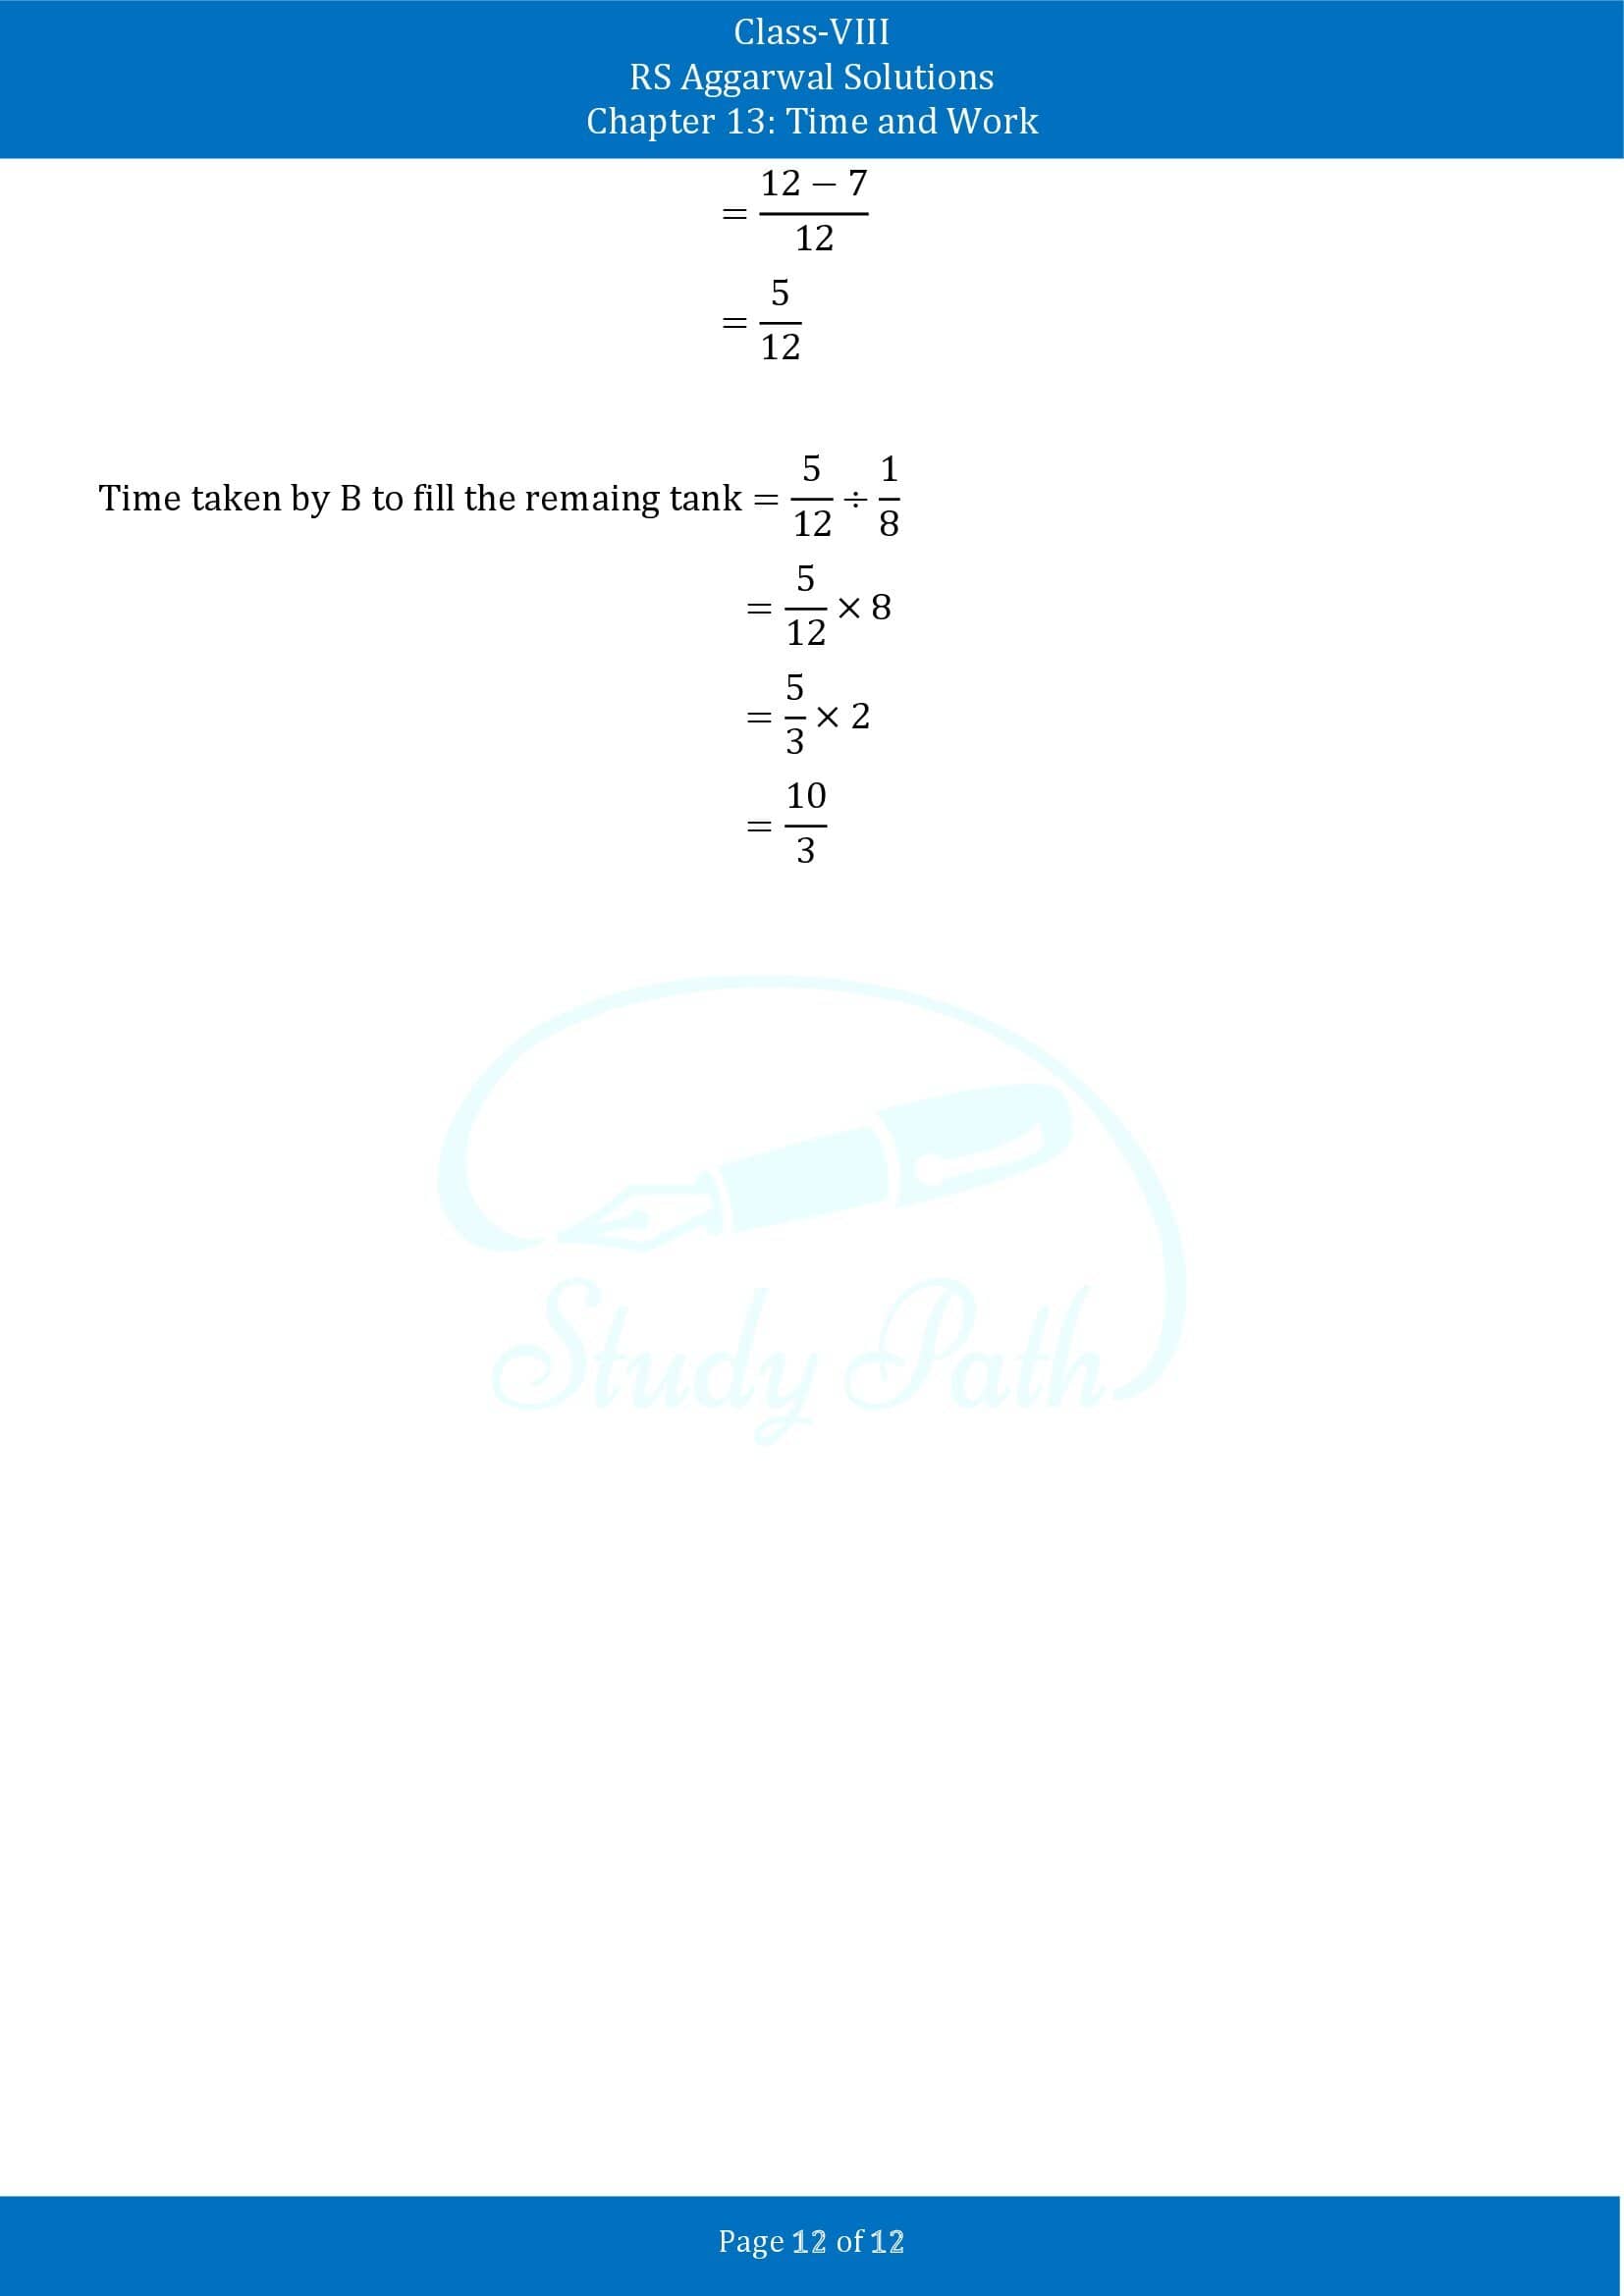 RS Aggarwal Solutions Class 8 Chapter 13 Time and Work Exercise 13A 00012